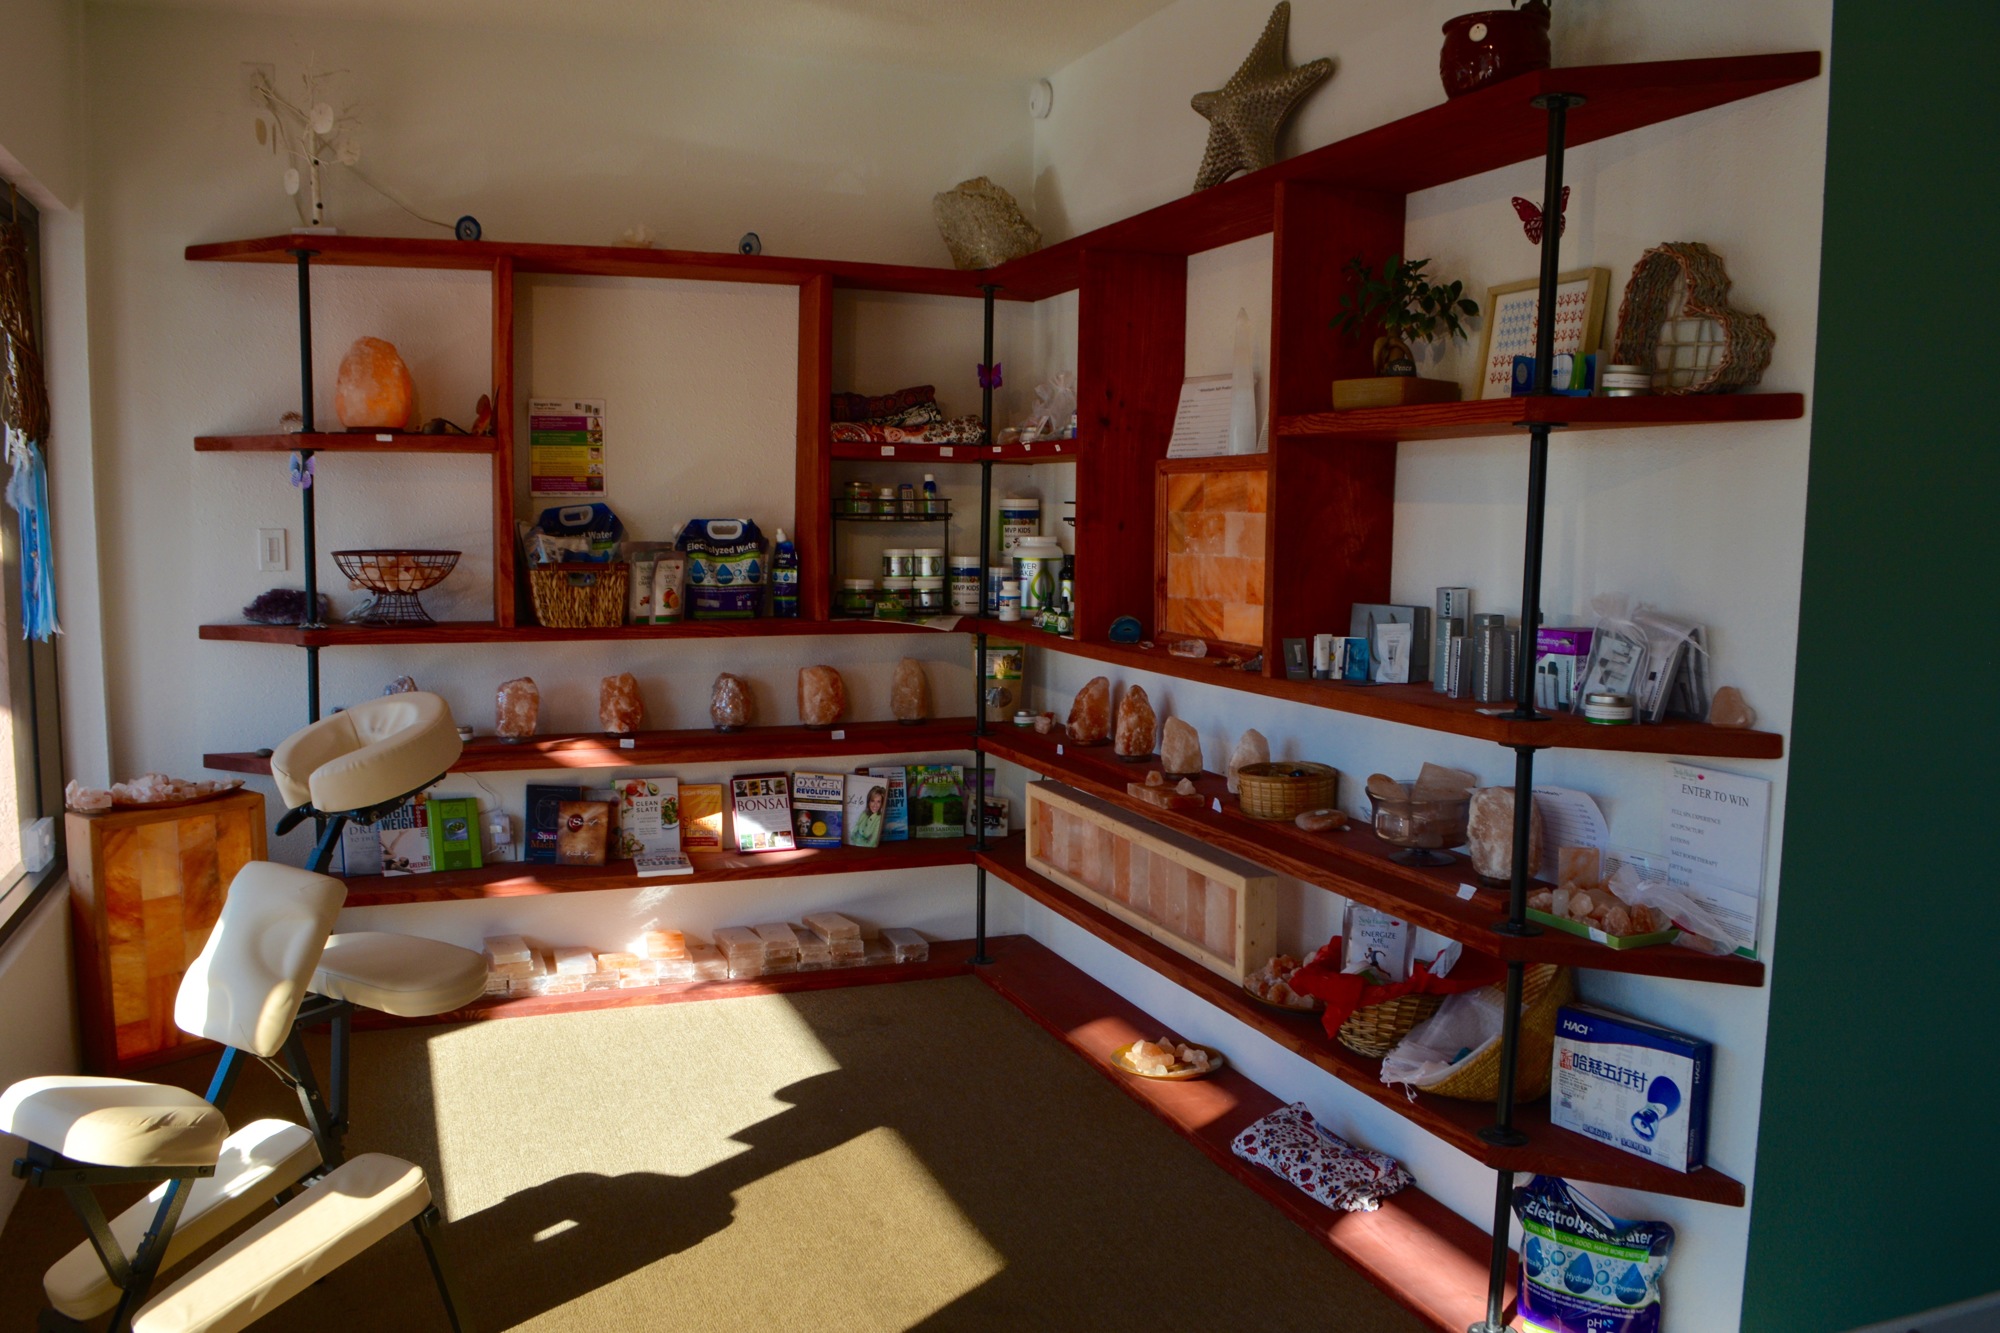 Salt lamps, pH-balanced water, reading materials and more are sold at Siesta Healing.